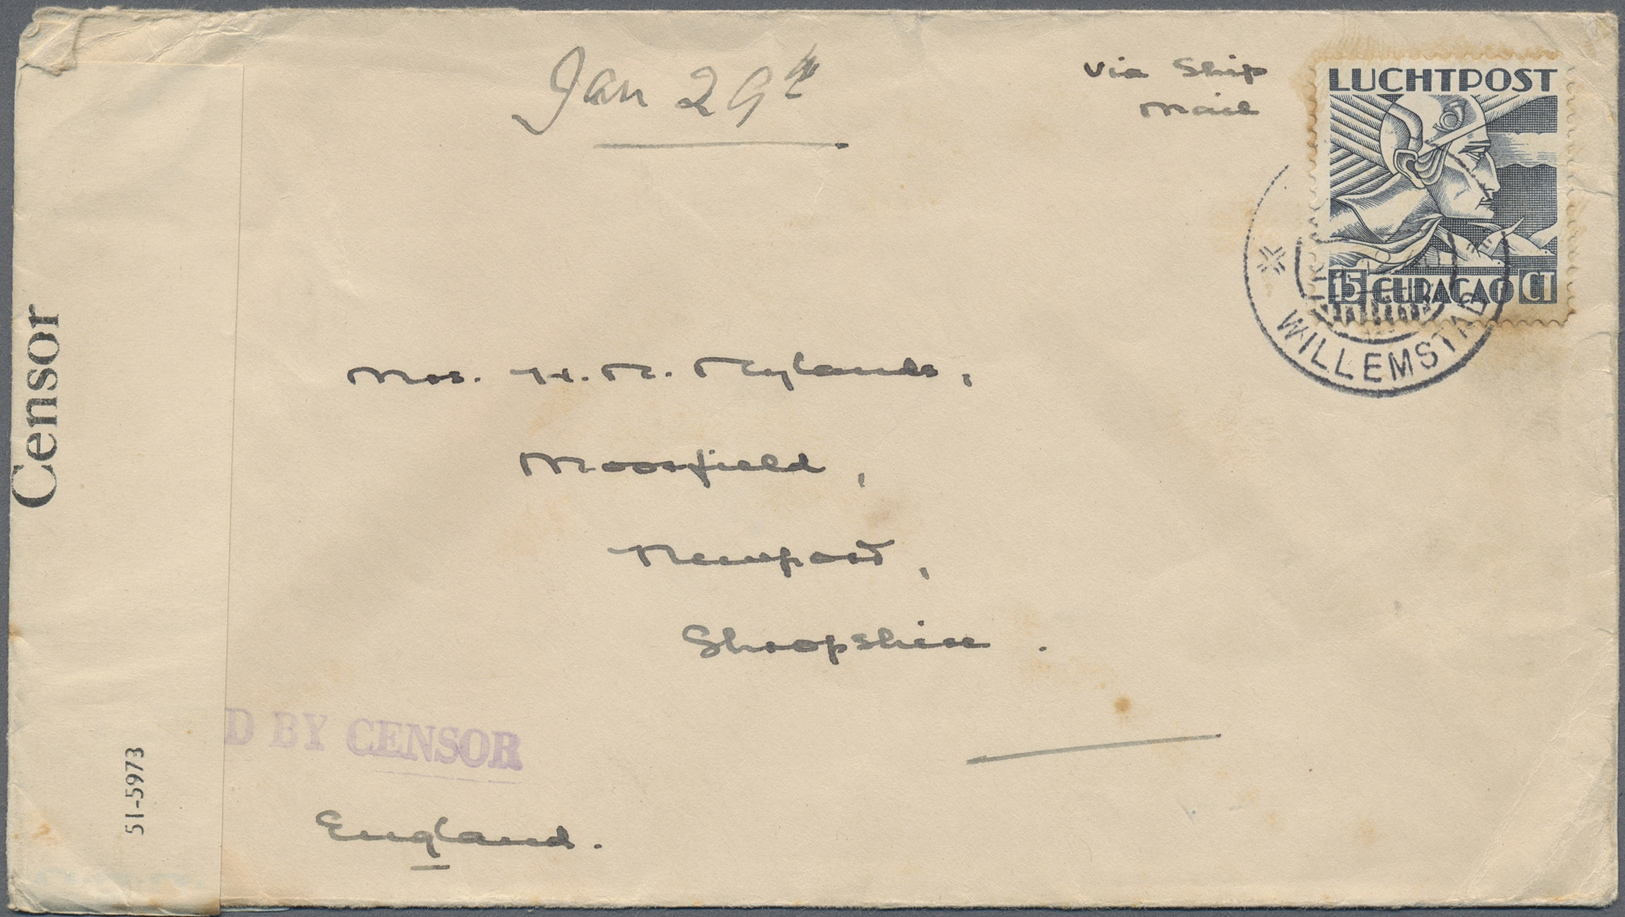 Br Curacao: 1940. Air Mail Envelope Addressed To England Bearing Air Mail Yvert 5, 15c Grey Tied By Willemstad Date Stam - Curacao, Netherlands Antilles, Aruba